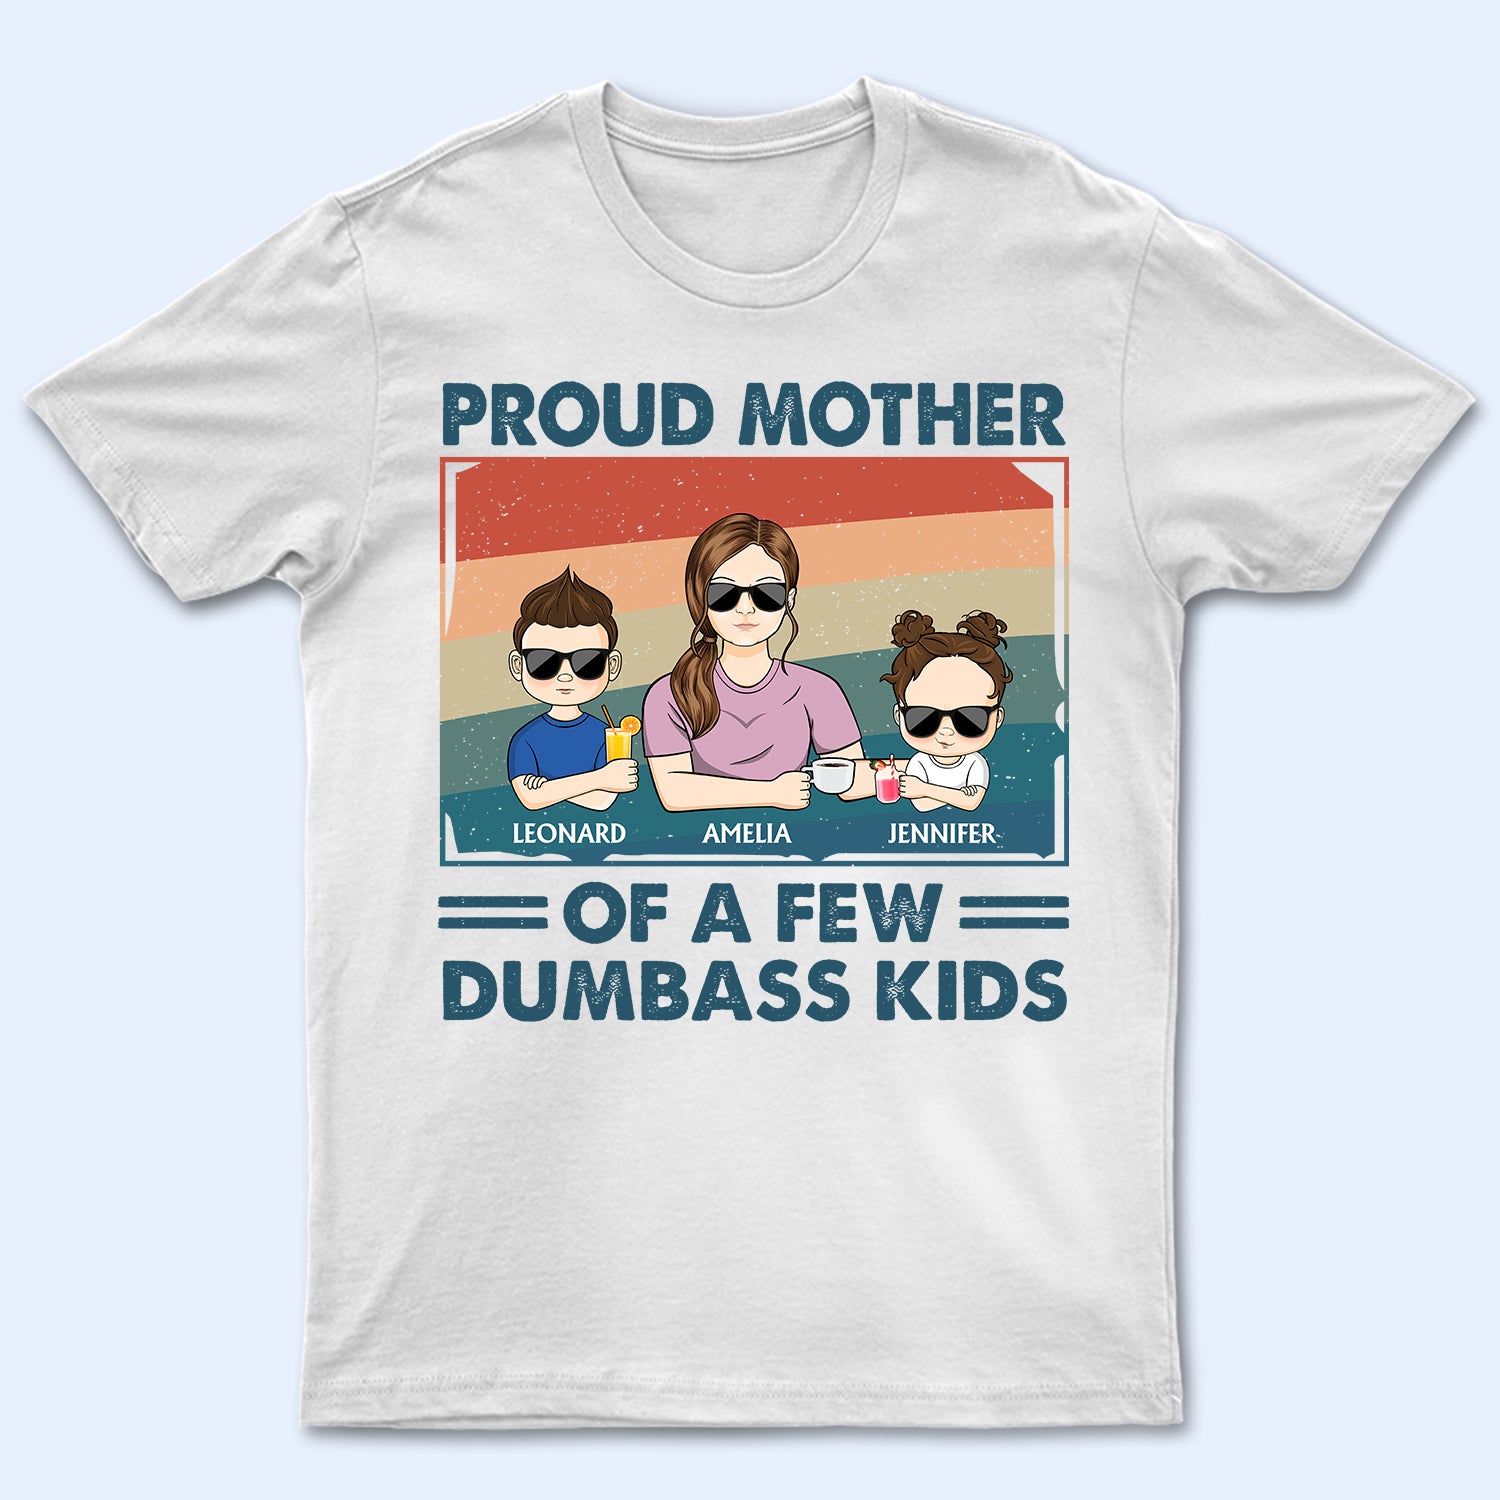 Proud Mother Of A Few - Gift For Mom, Mother, Grandma - Personalized T Shirt